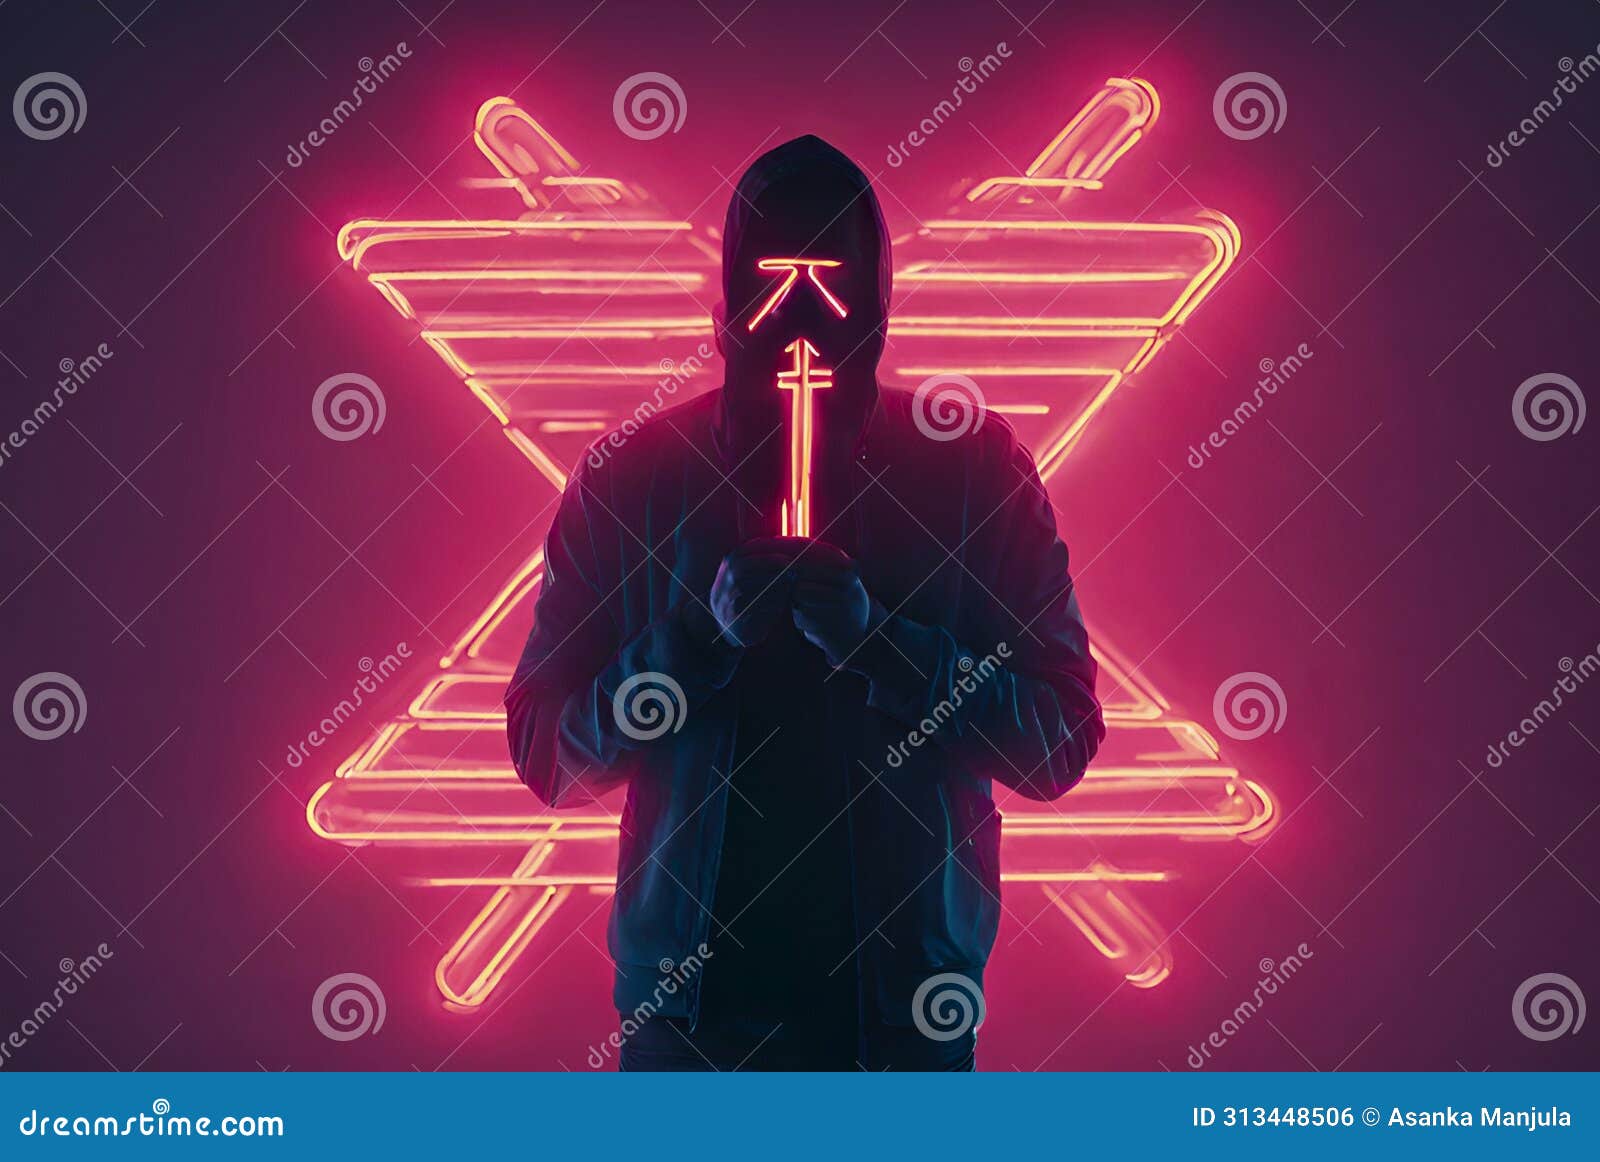 man obscured by neon cross. a person stands holding a glowing neon cross in front of their face